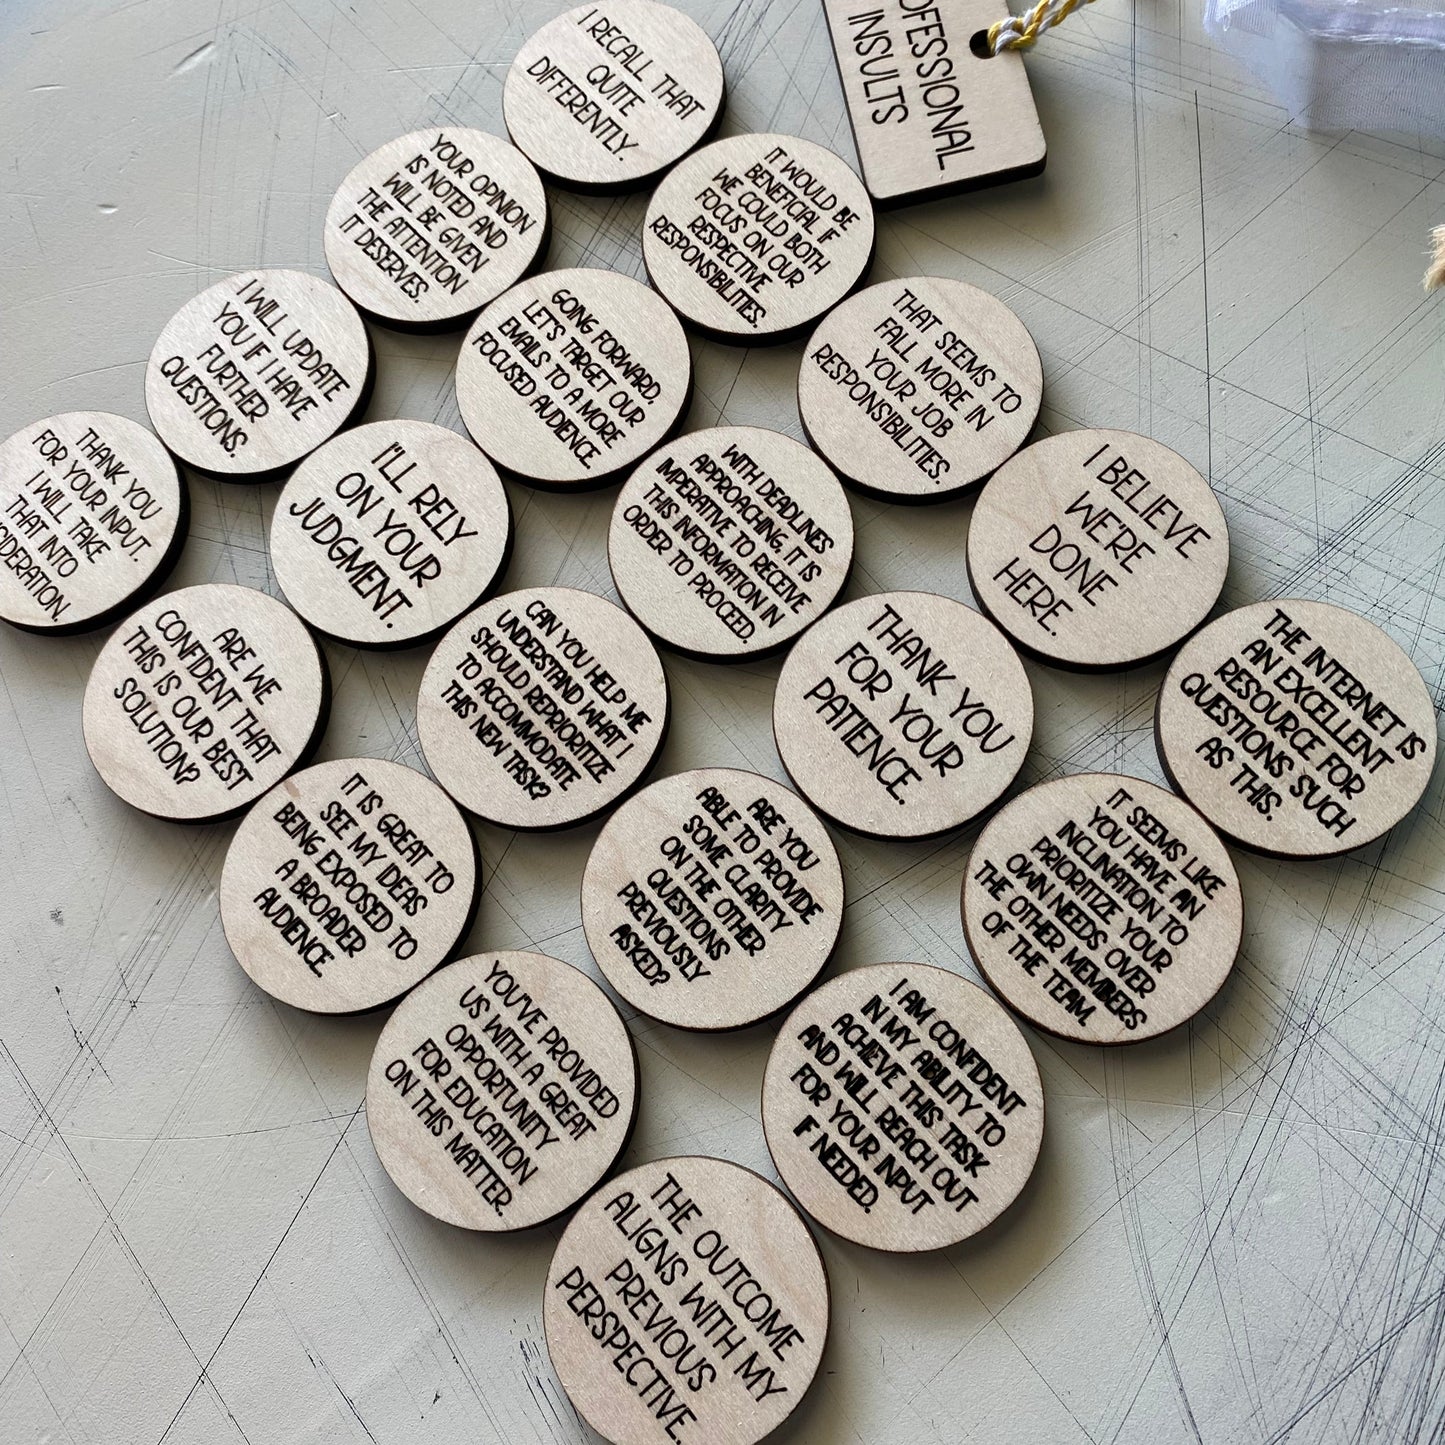 Professional Insults - 20 wood tokens in an organza bag